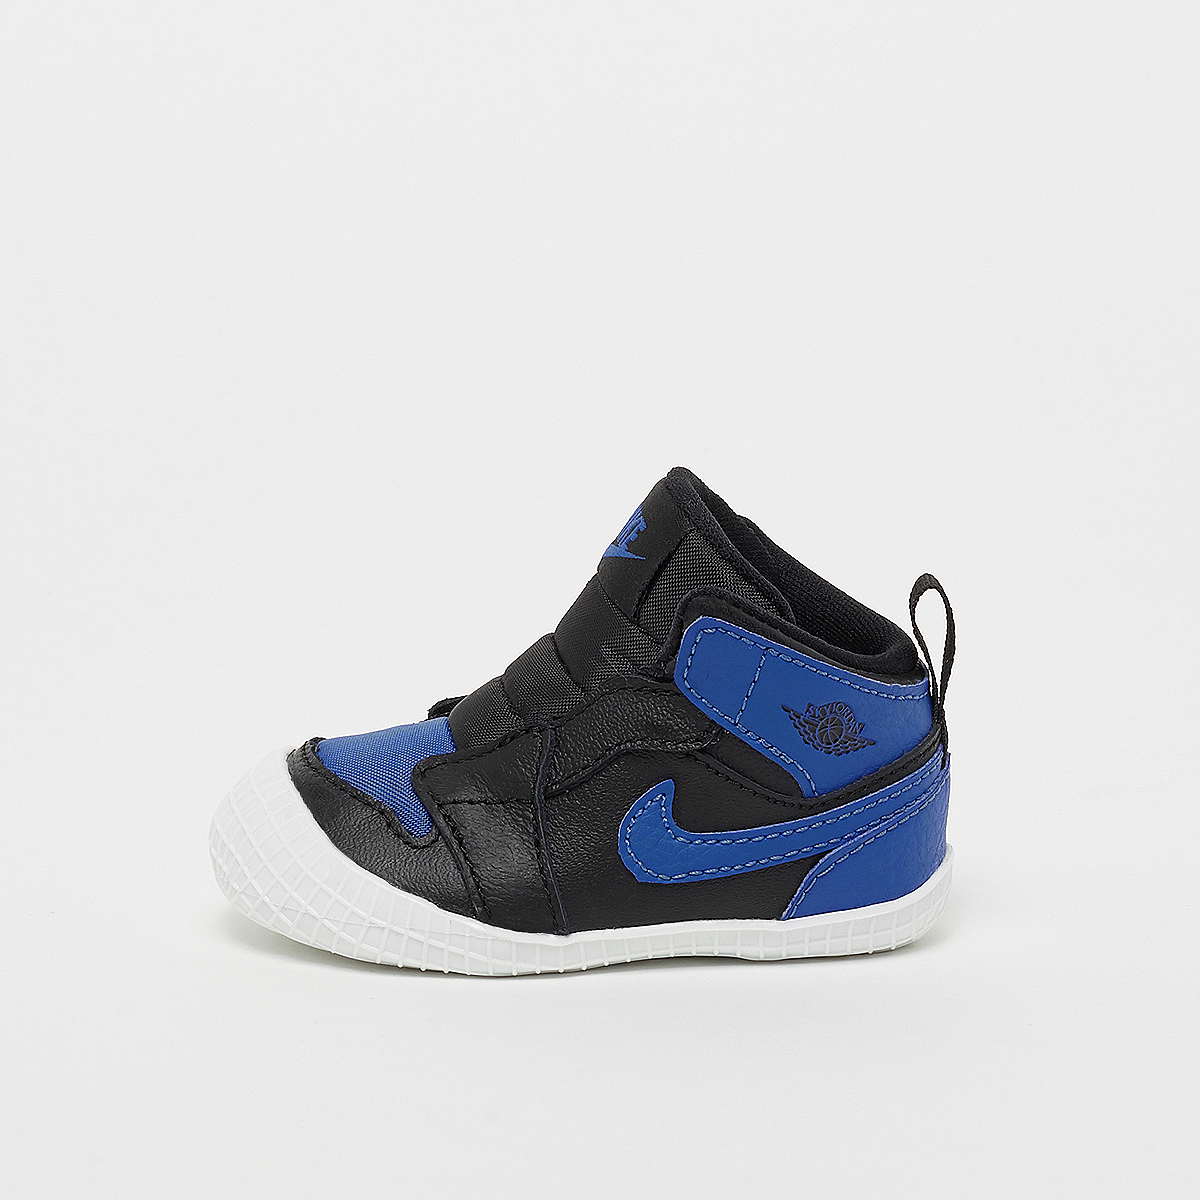 jordan 1 crib bootie (td), basketball, chaussures, black/varsity royal/white, taille: 16, tailles disponibles:17,18.5,19.5,16